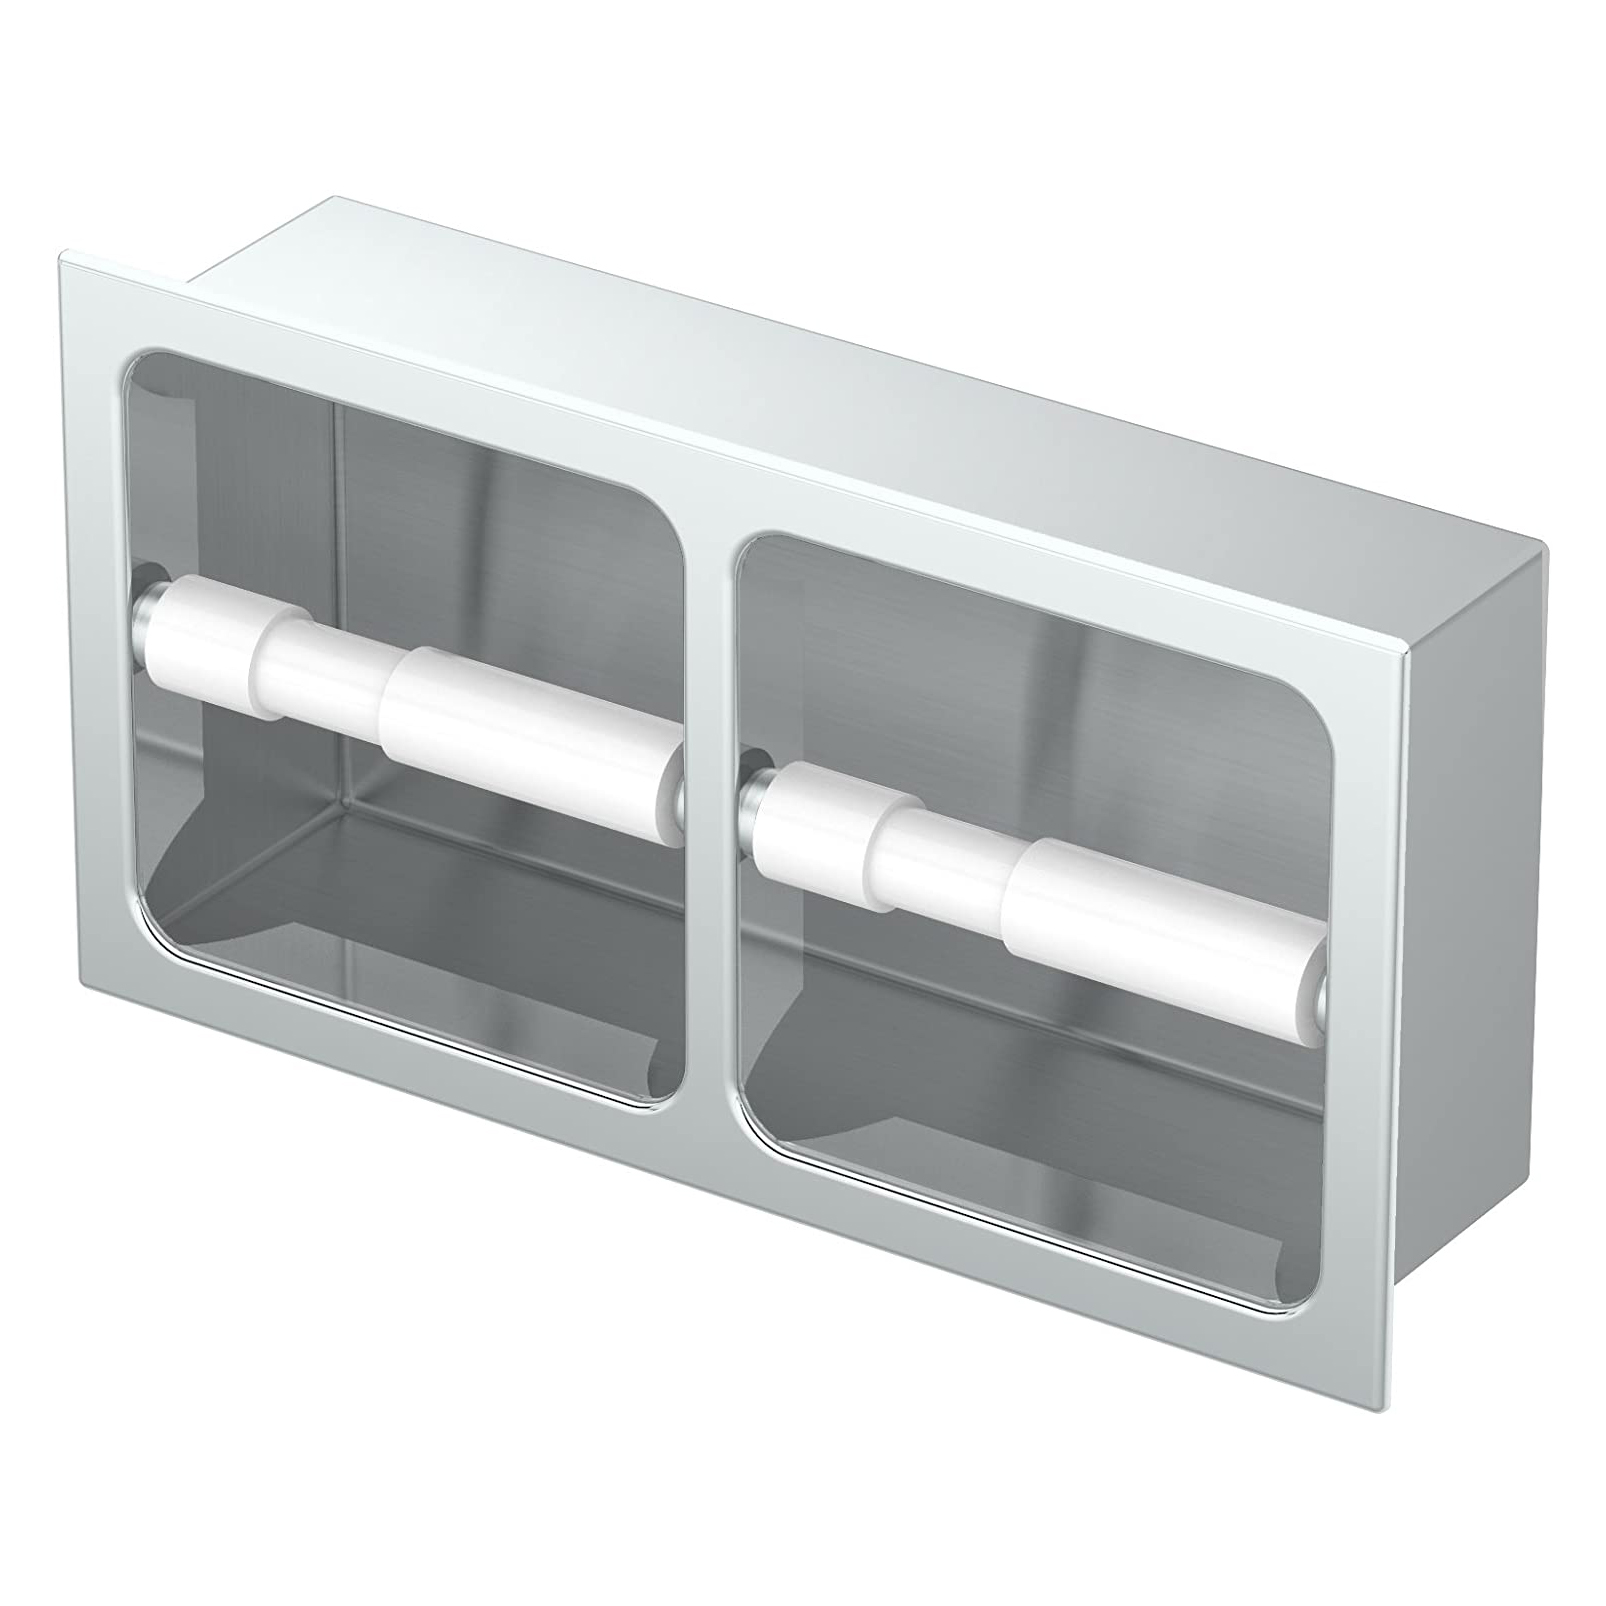 Double Roll Recessed Tissue Holder in Chrome